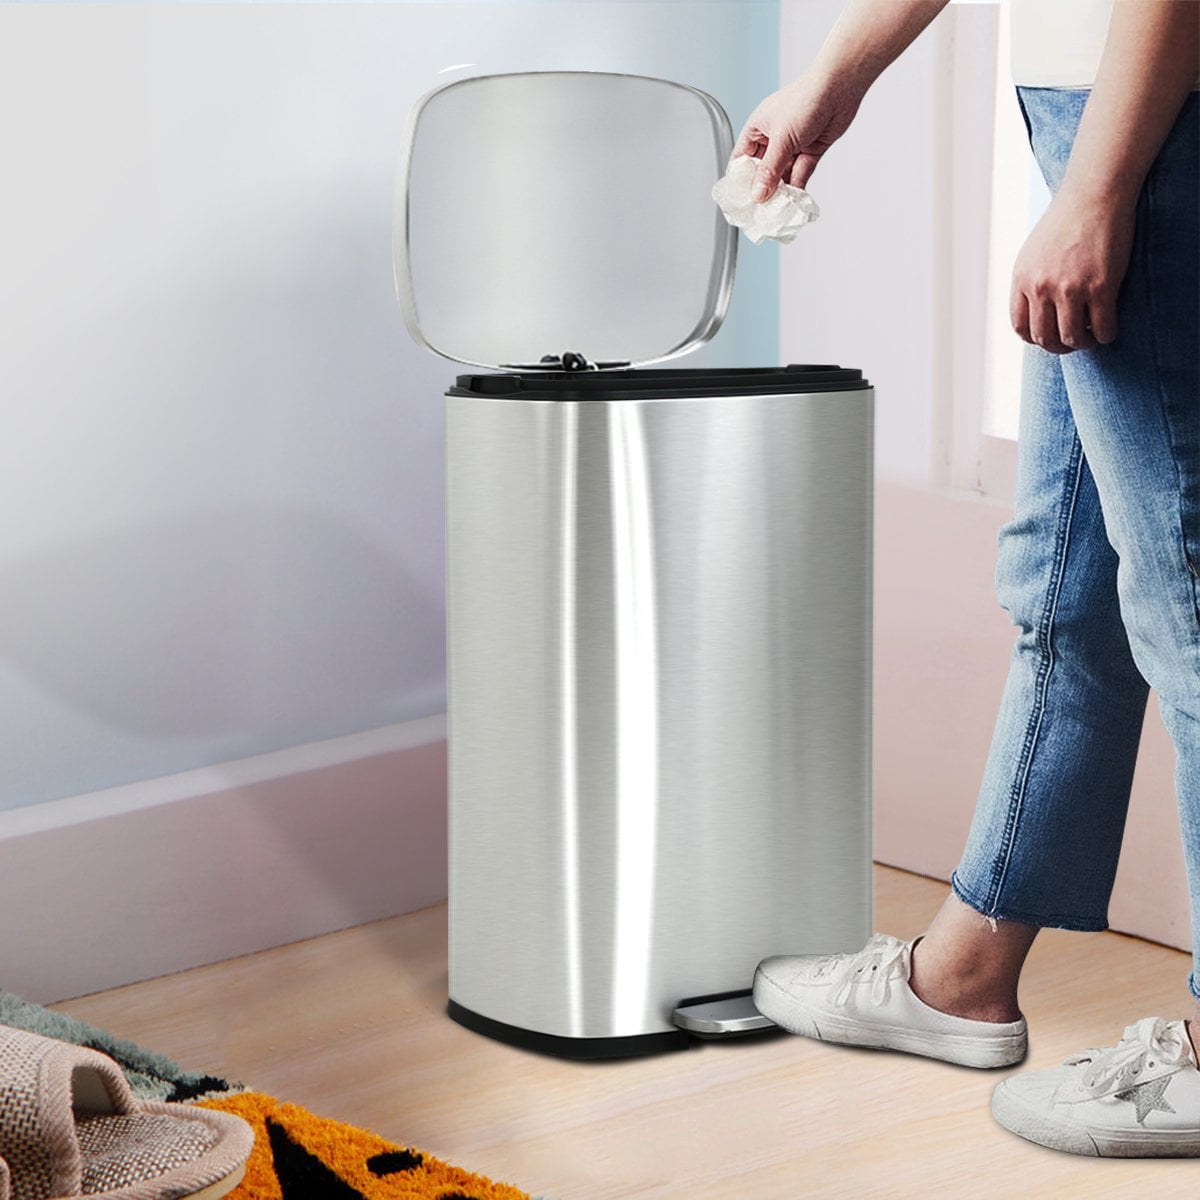 SULTEN Step trash can, stainless steel, 13 gallon - IKEA